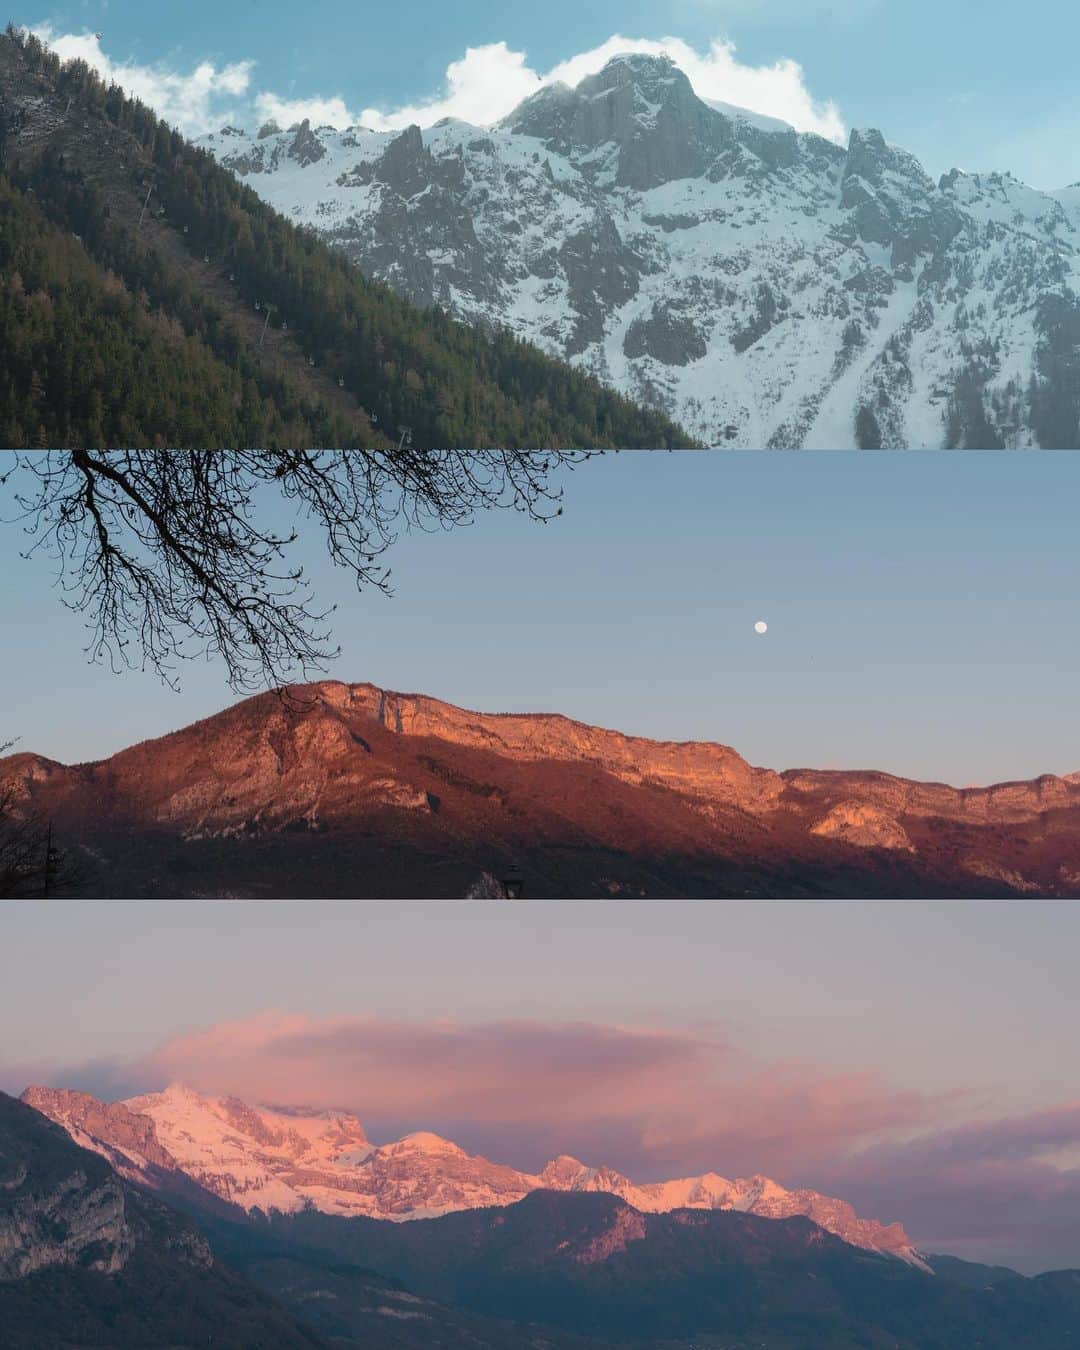 Putri Anindyaのインスタグラム：「french alps / pastels   I kinda want to have these printed and I would put a framing on my wall. It was a surreal feeling to finally see these in person. Since I was a kid, when I heard about the word Alps, my mind always refer to France. For those who probably don’t know, The Alps 🏔 are the highest and most extensive mountain range system that lie in south-central Europe. The mountain range stretches approximately 1200 kilometers in a crescent 🌙 shape across eight Alpine countries: France, Switzerland, Monaco, Italy, Liechtenstein, Austria, Germany, and Slovenia. So yep, to see these last spring was pretty spectacular.   #frenchalps #frenchalps🇫🇷 #alps #france #europe」